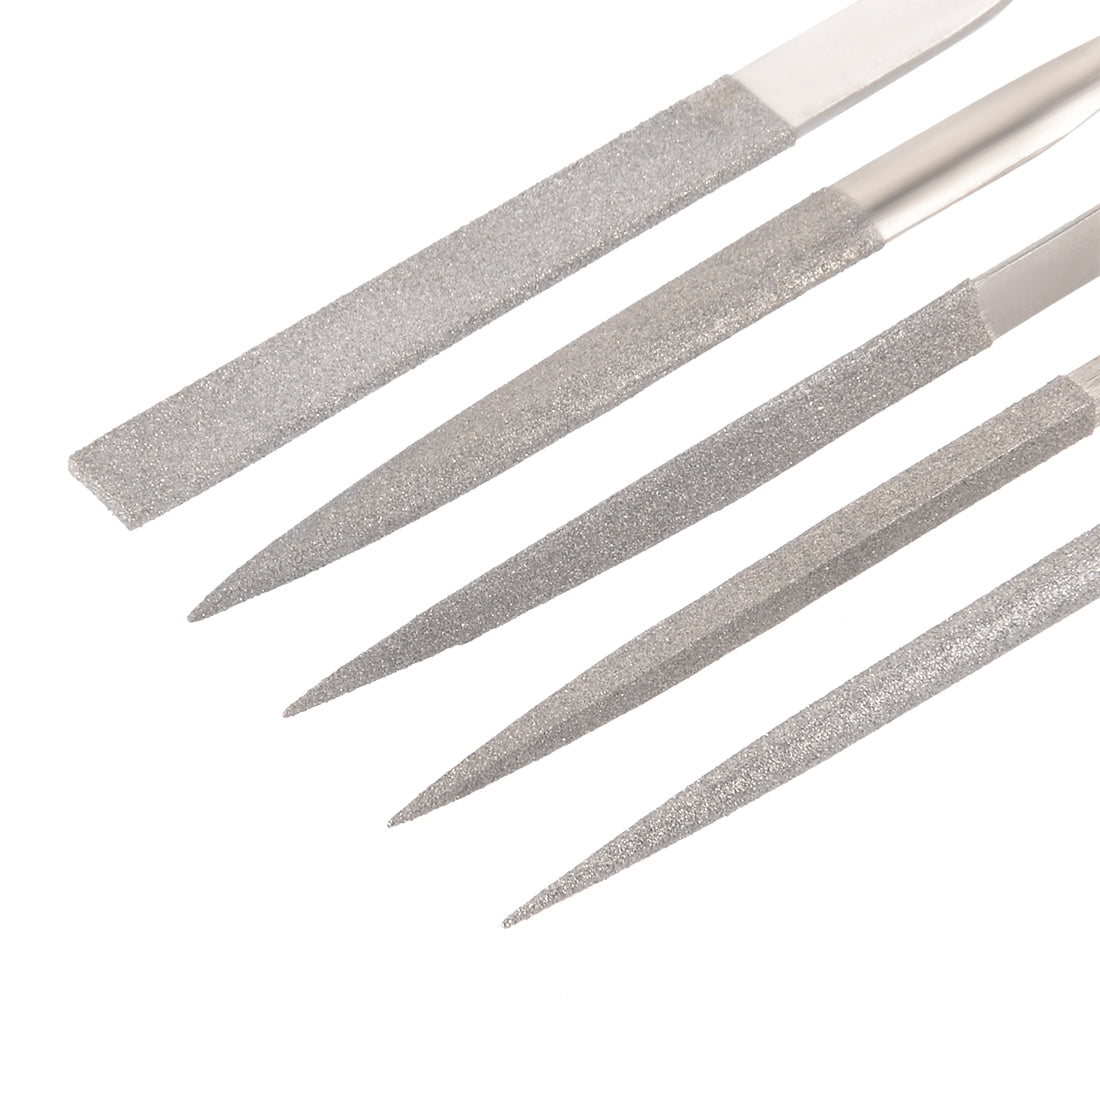 Uxcell Uxcell 5Pcs 5mm x 180mm Diamond Needle File Set for Metal Glass Stone